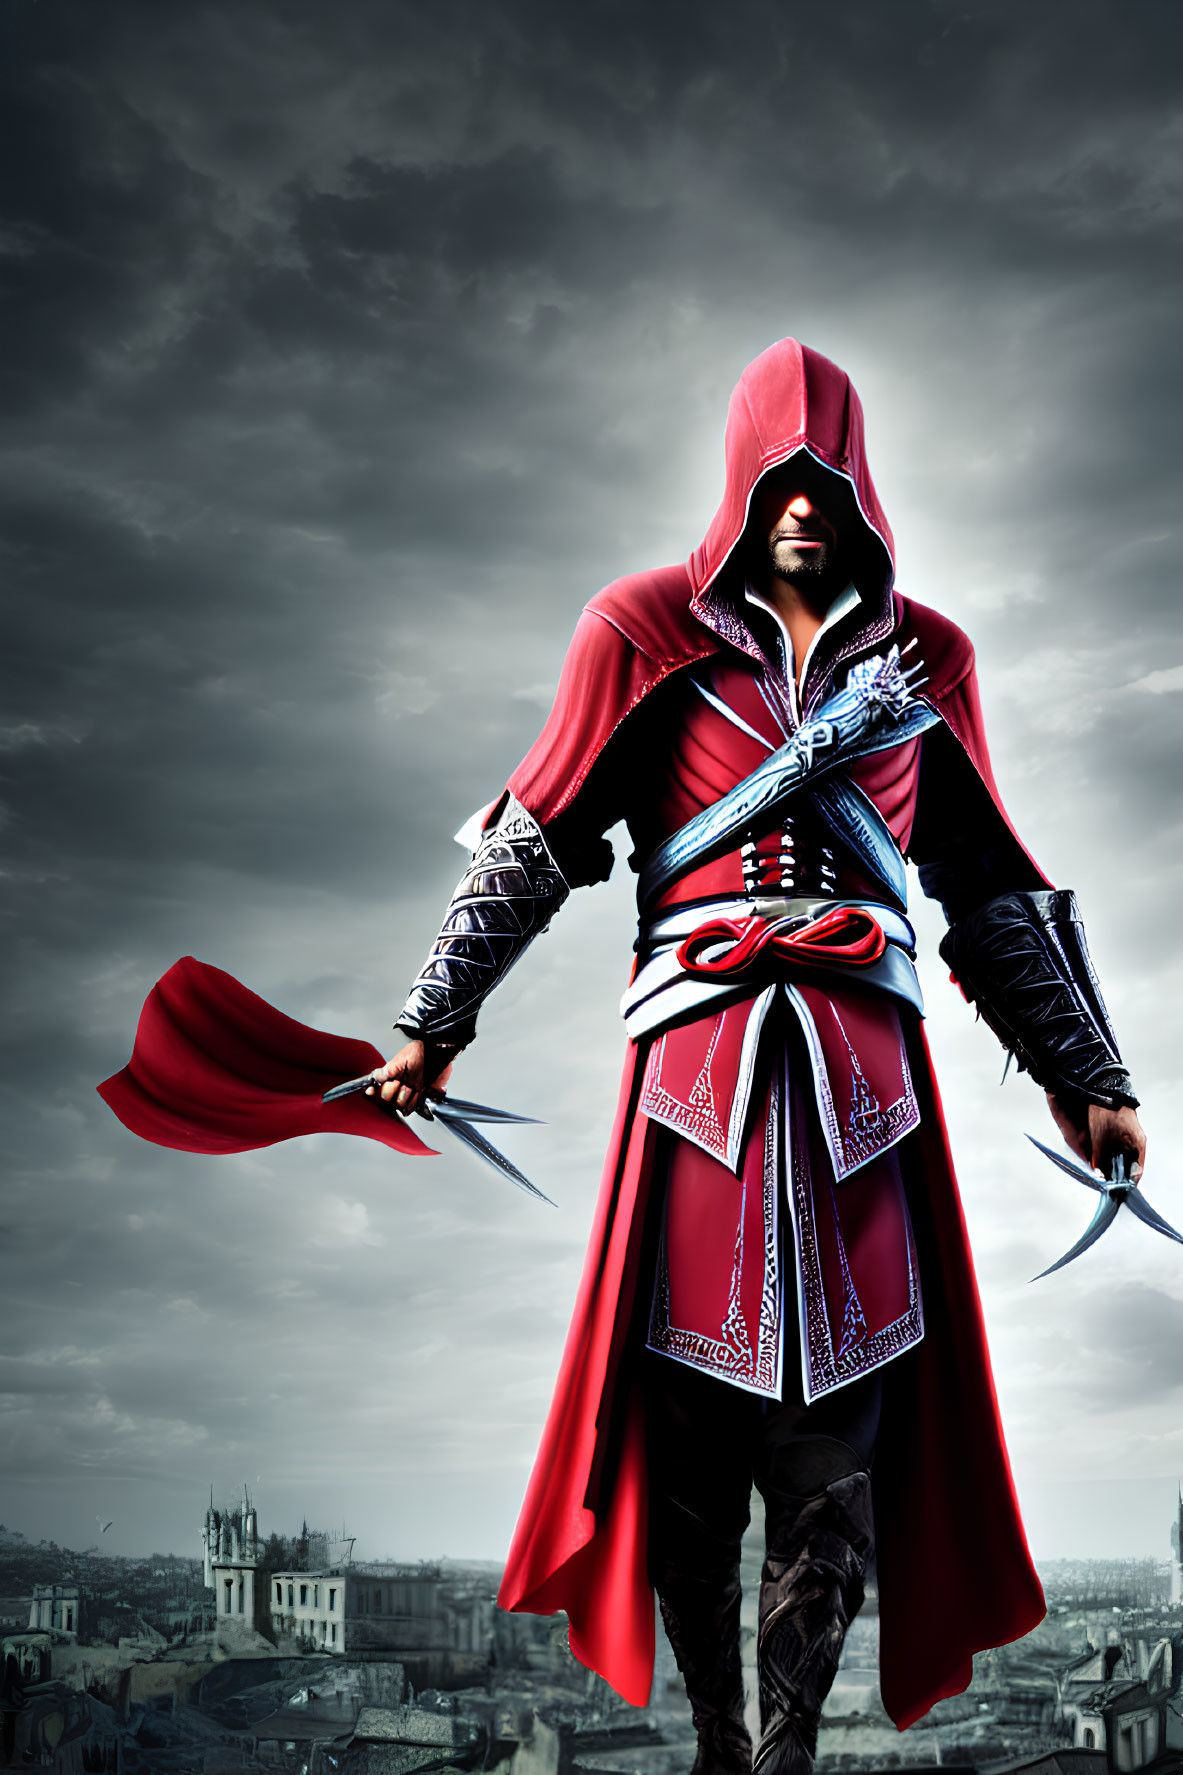 Assassin's Creed costume with hidden blades in cityscape background